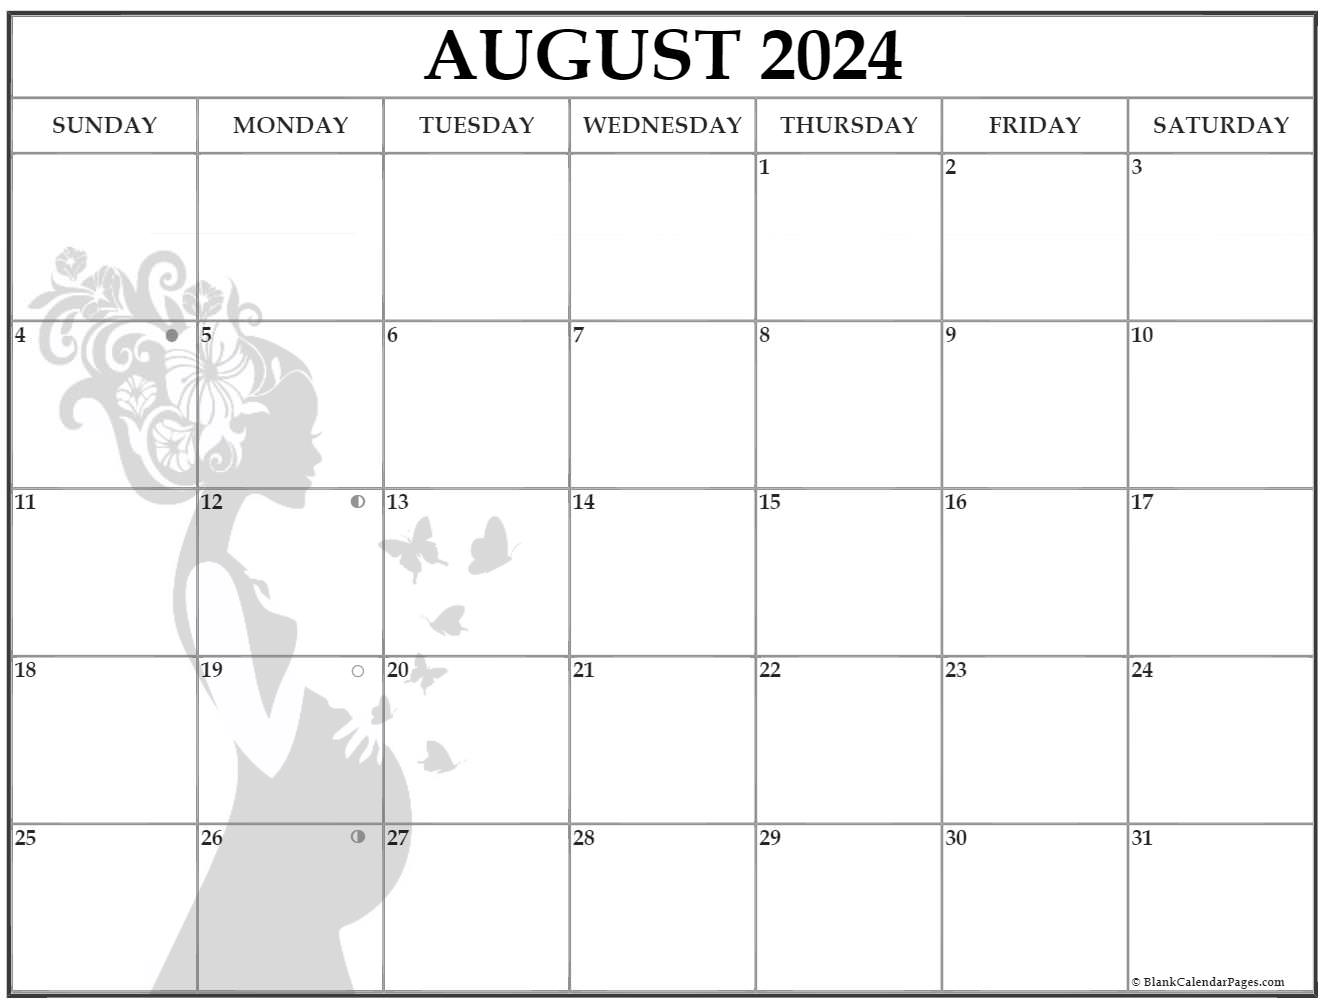 Collection of August 2021 photo calendars with image filters.